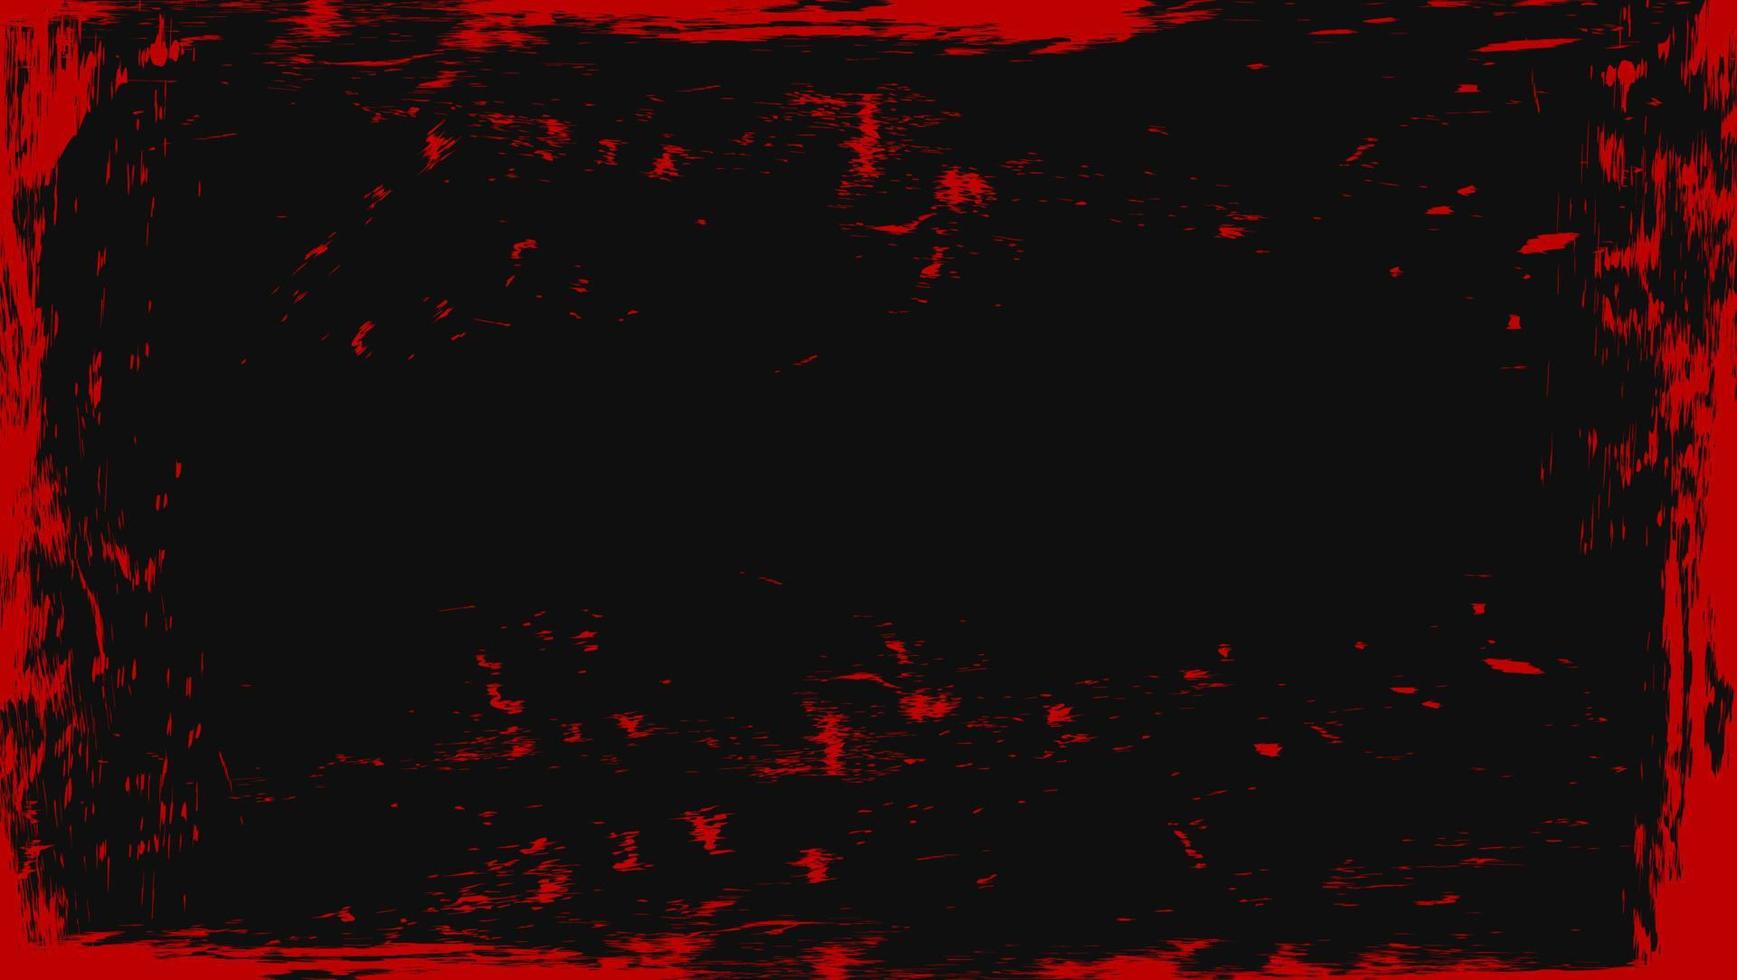 Abstract Dirty Red Grunge Texture Design In Black Background vector